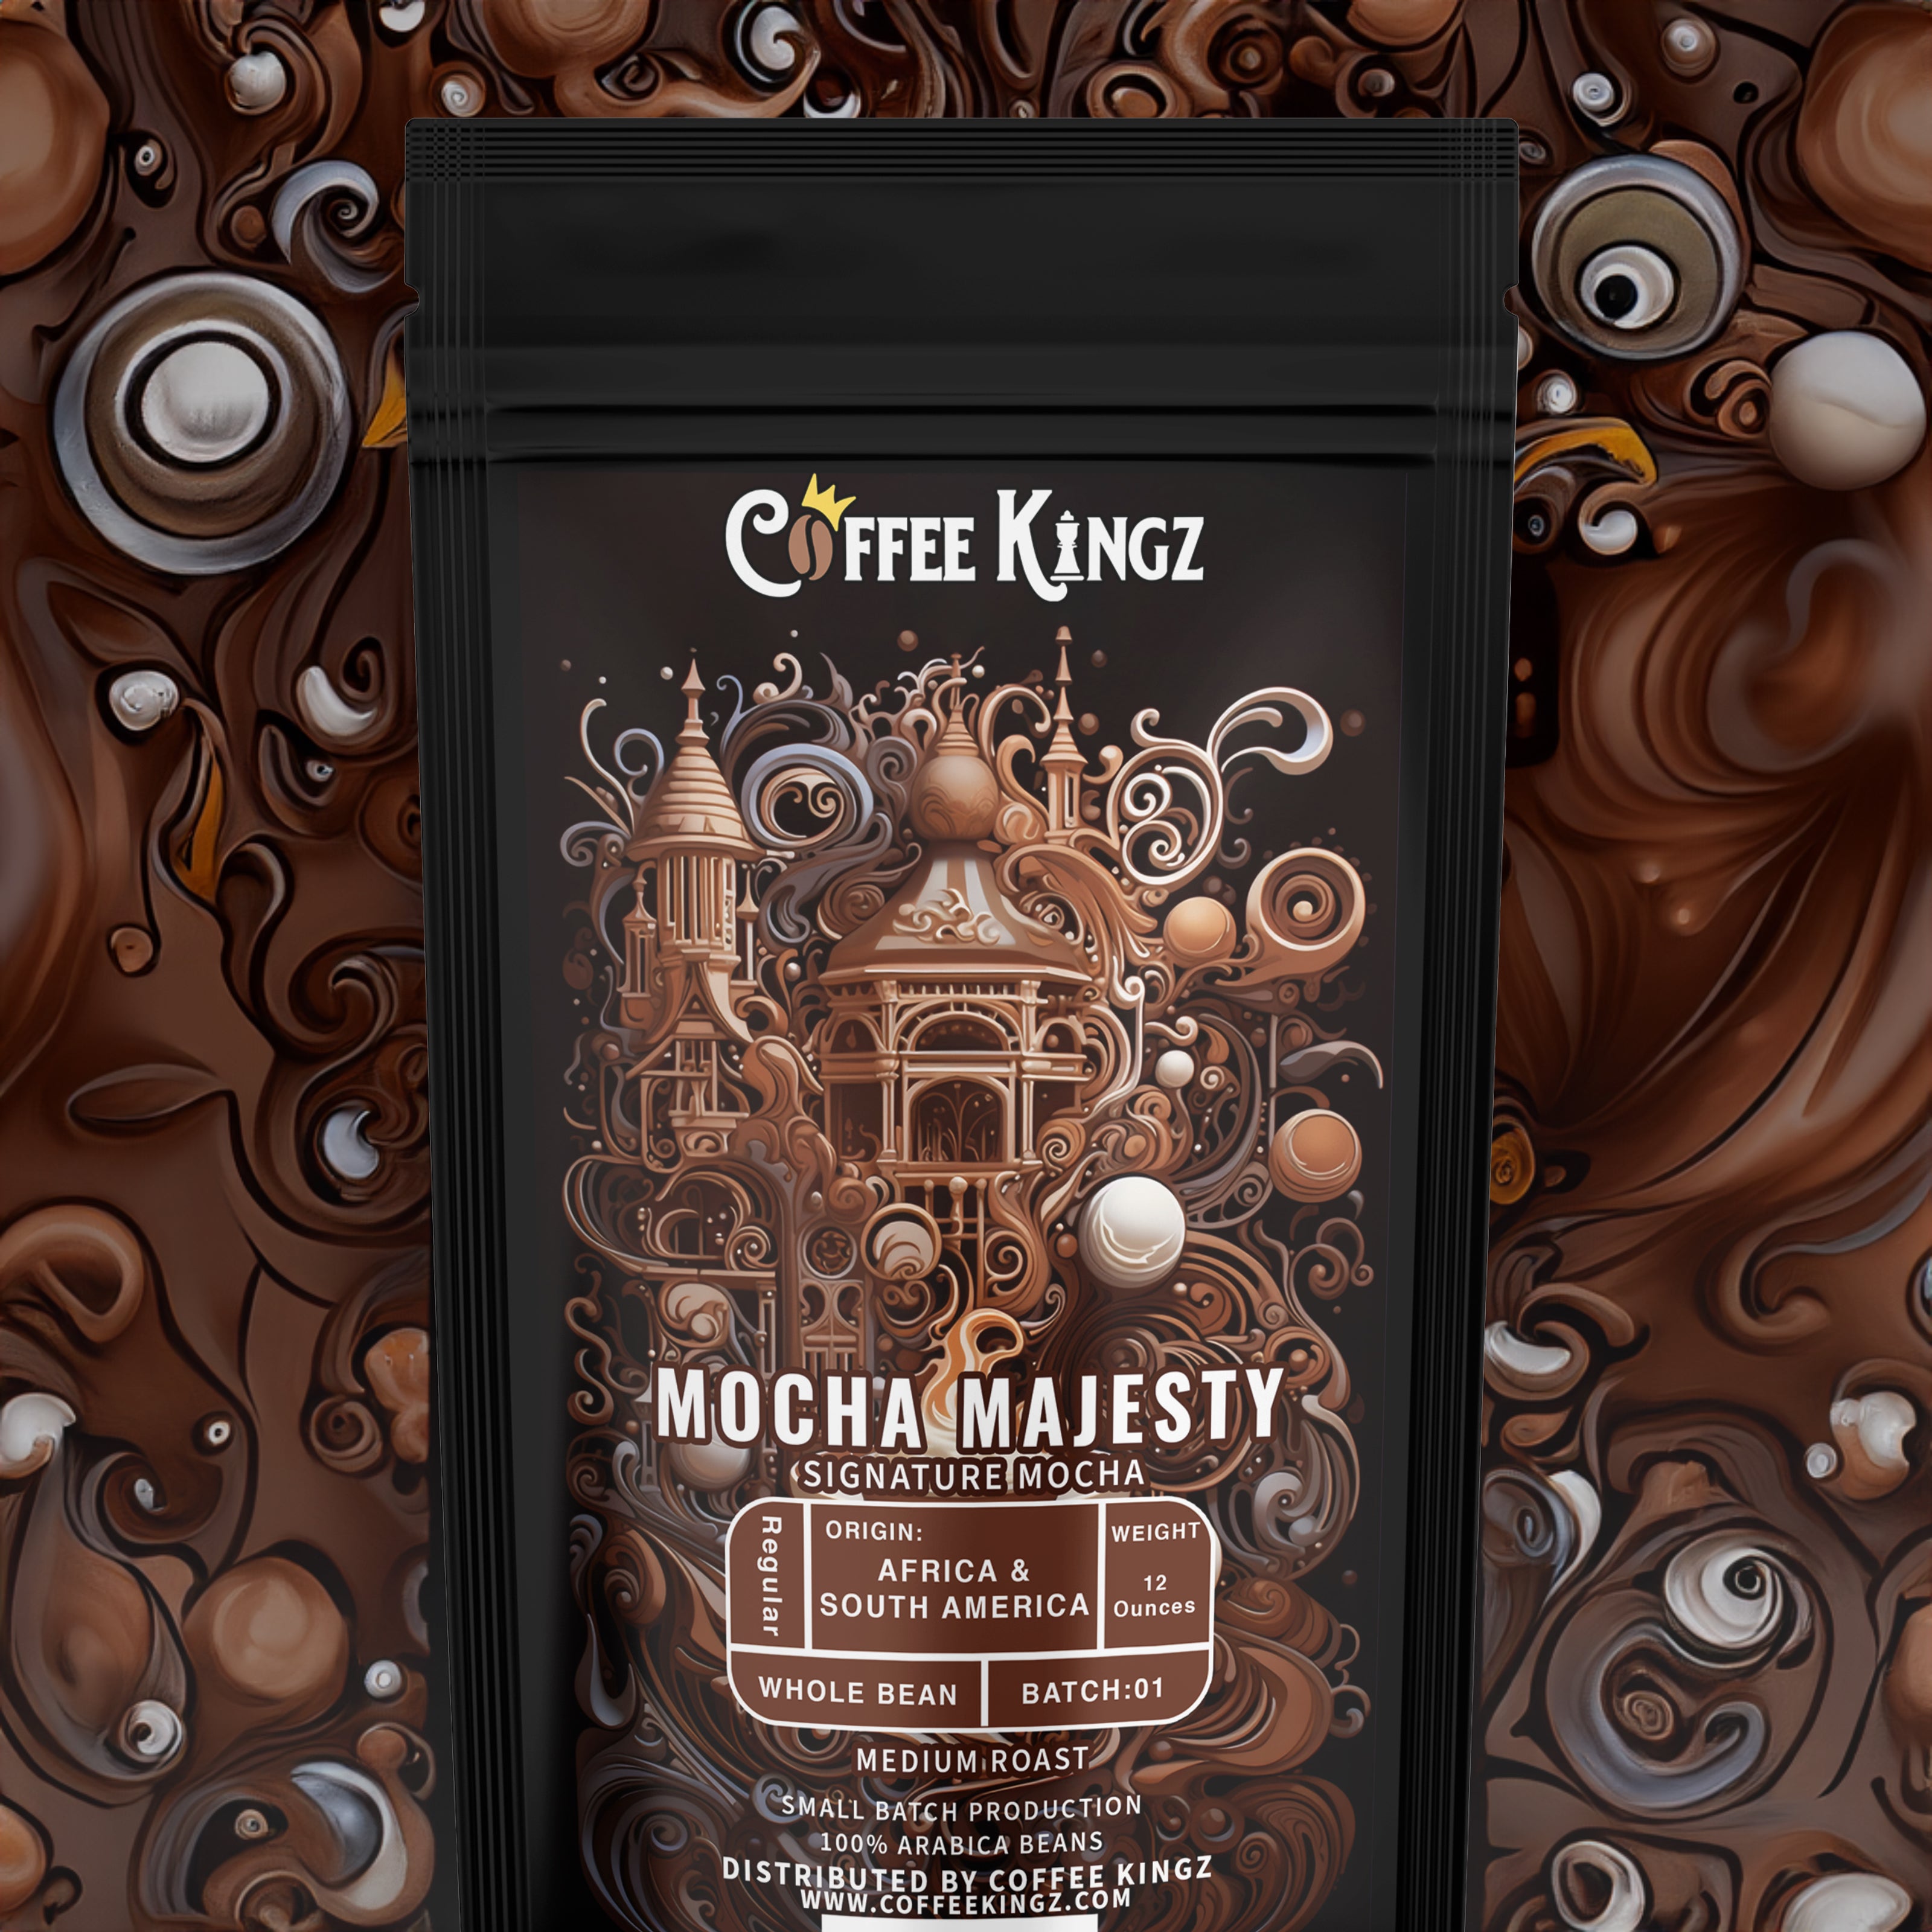 An intricately designed coffee label for "coffee kingz," featuring a mocha majesty flavor with origins in South America and Ethiopia, highlighting a rich and artistic presentation.